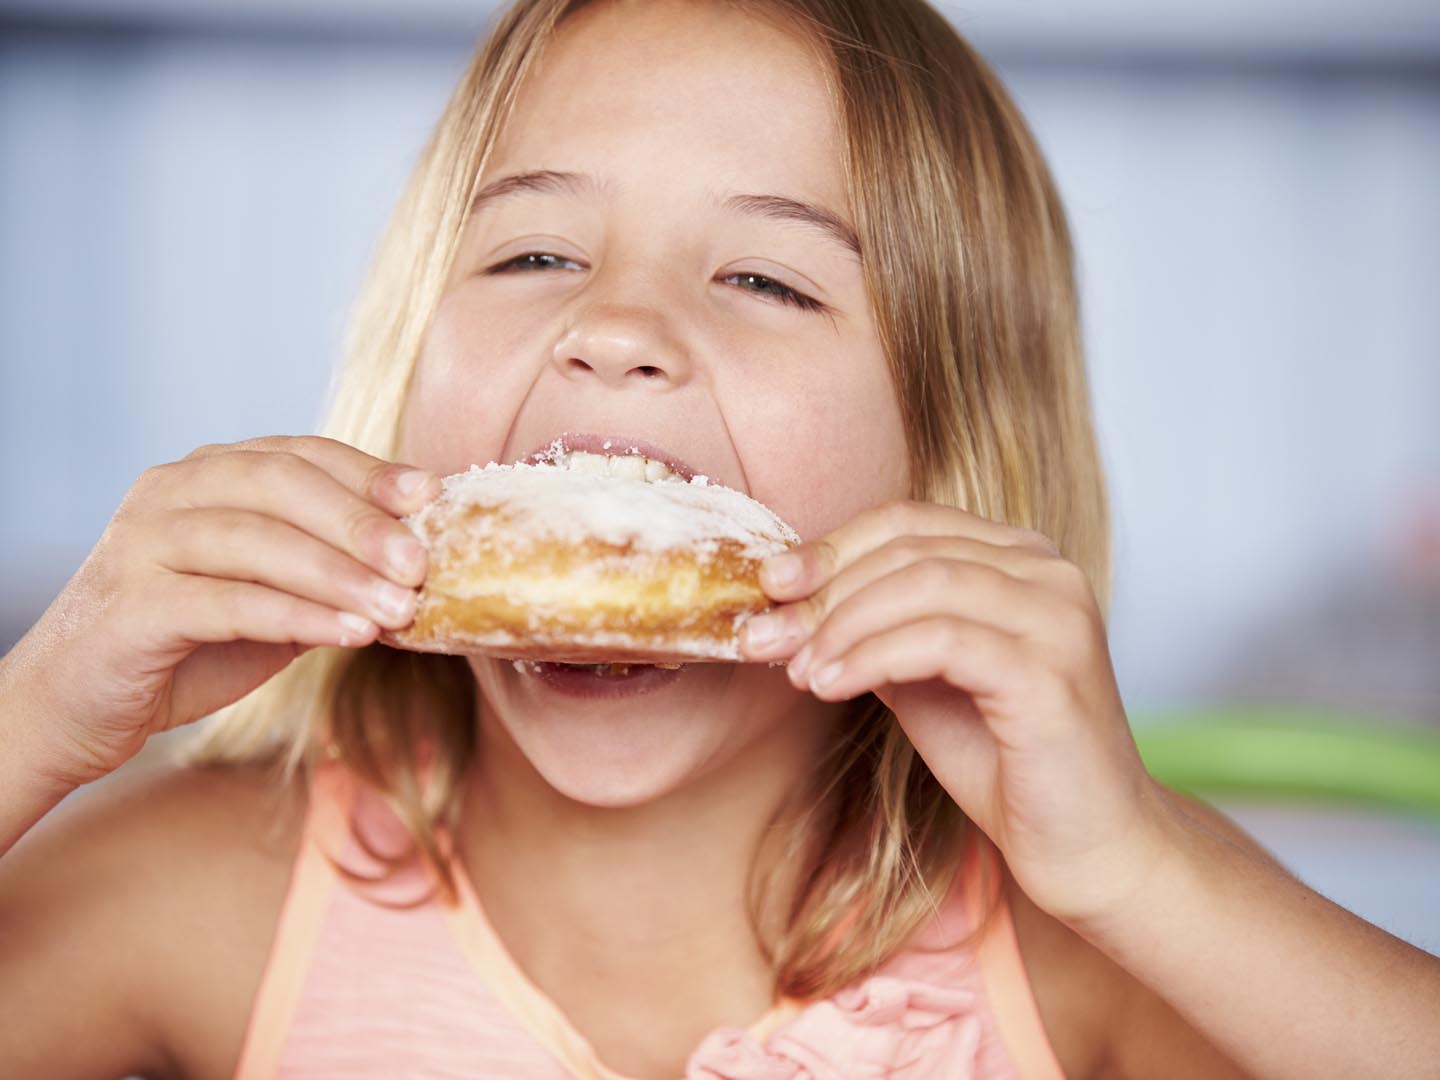 Young Girl Sitting At Table Eating Sugary Donut